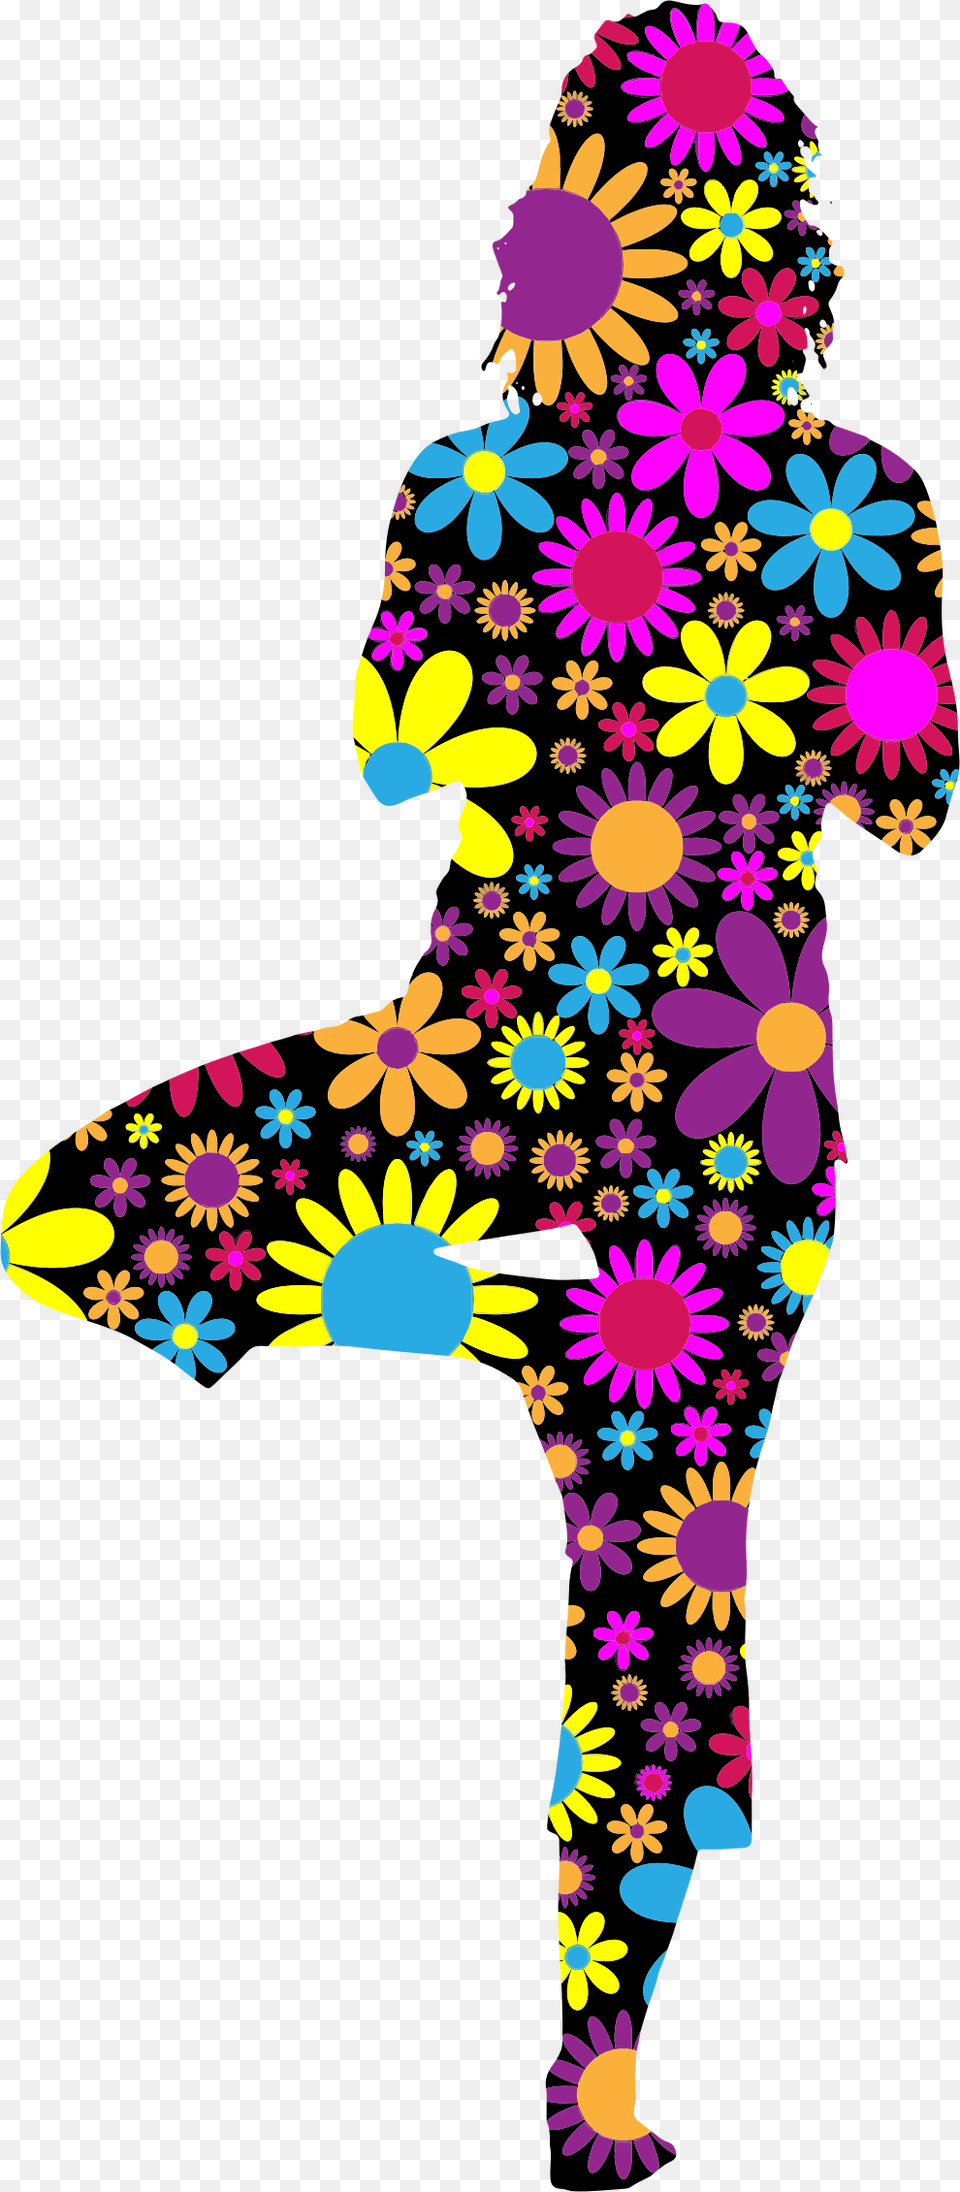 This Icons Design Of Floral Woman Yoga Pose, Art, Pattern, Graphics, Floral Design Png Image